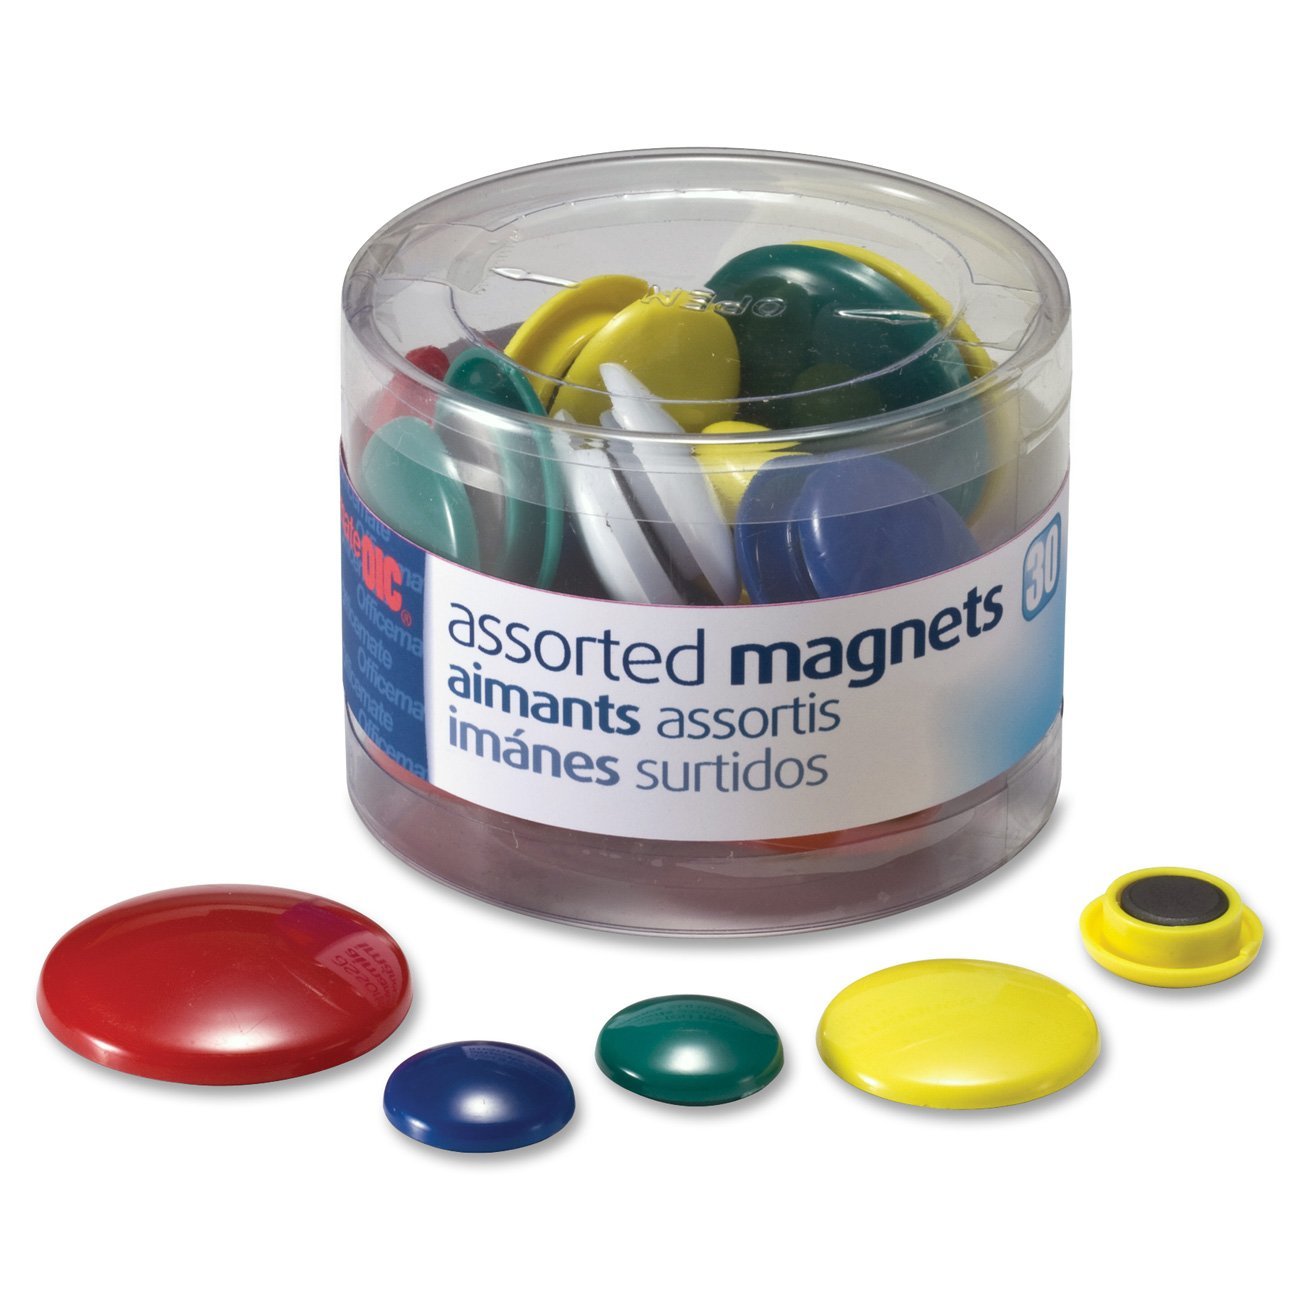 Tub of 30 magnets